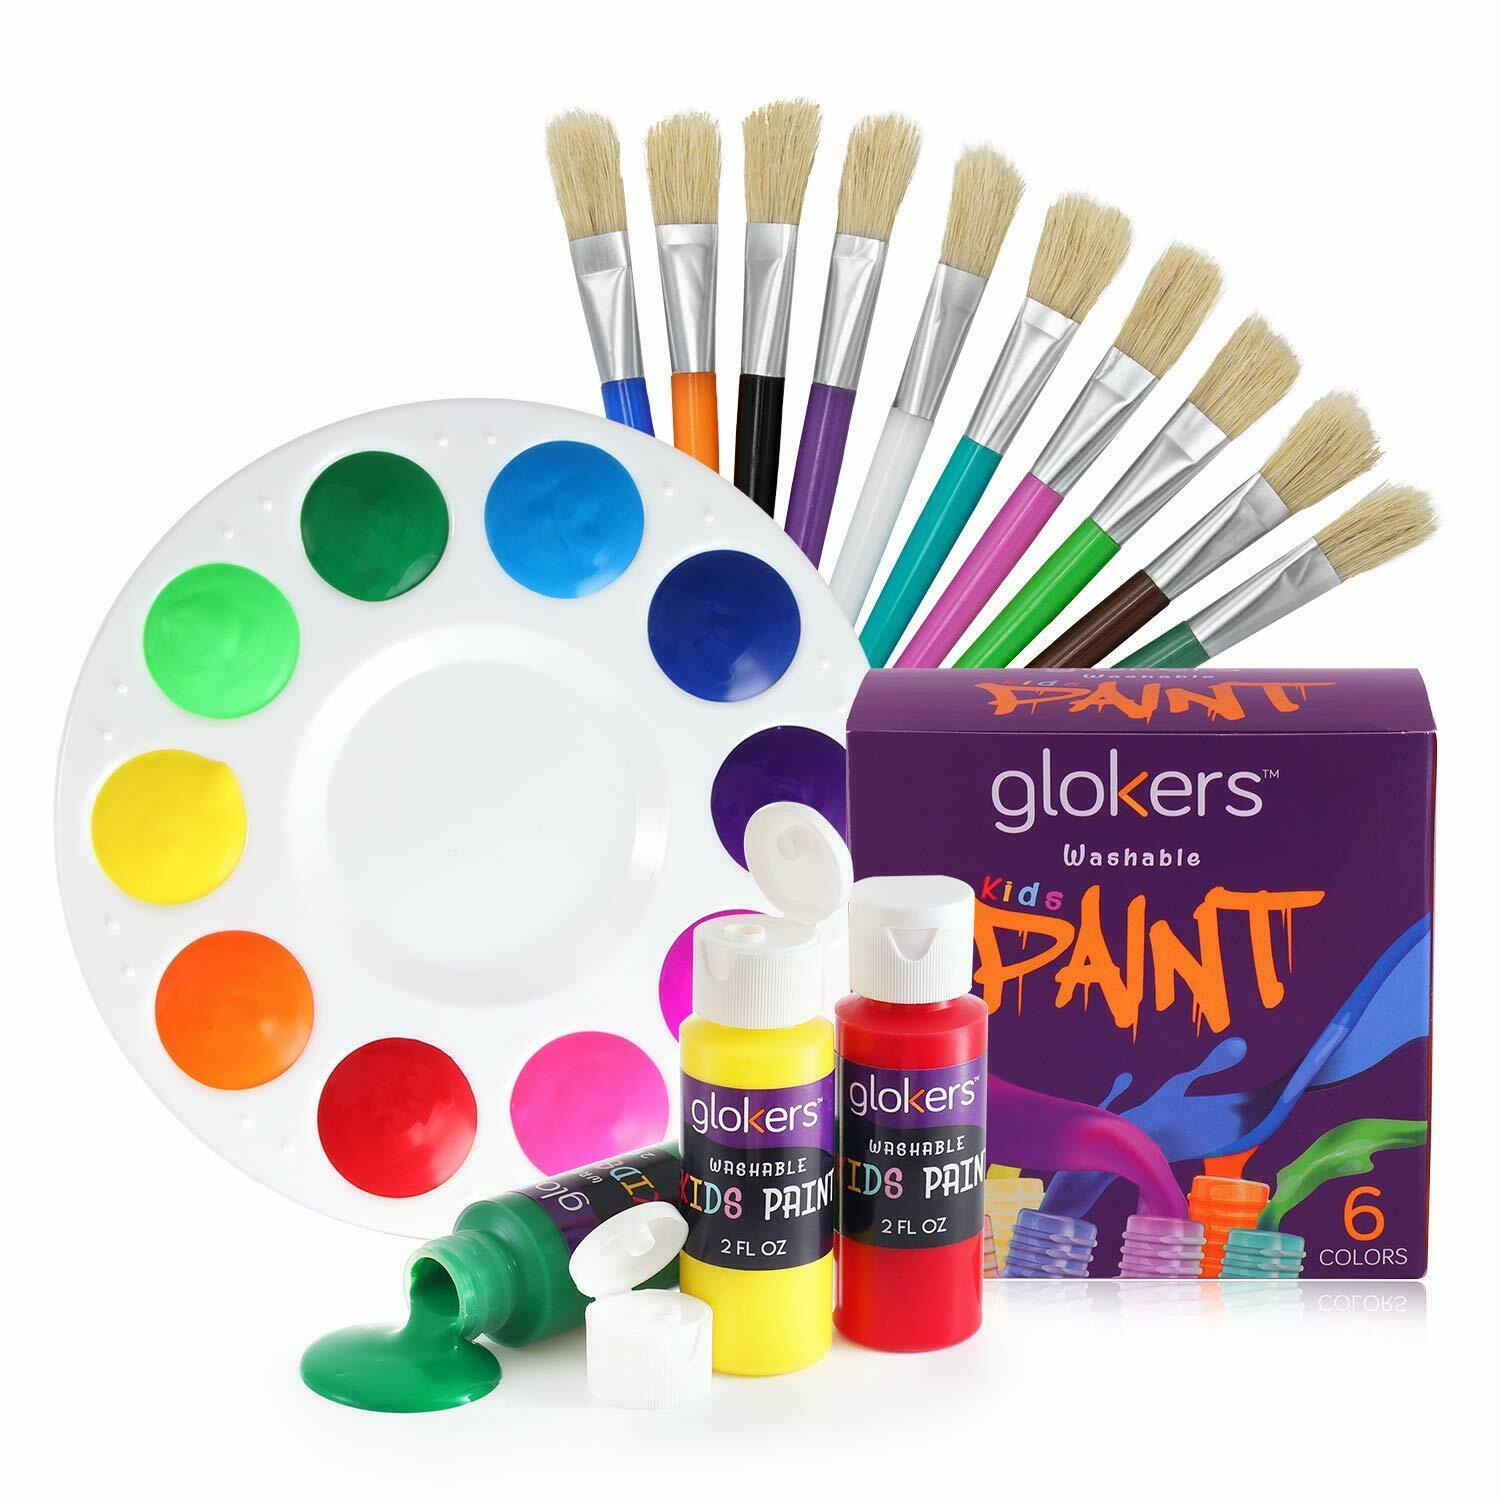 glokers 10-Piece Kids Flat Paint Brushes Set with Washable Paint and Palatte